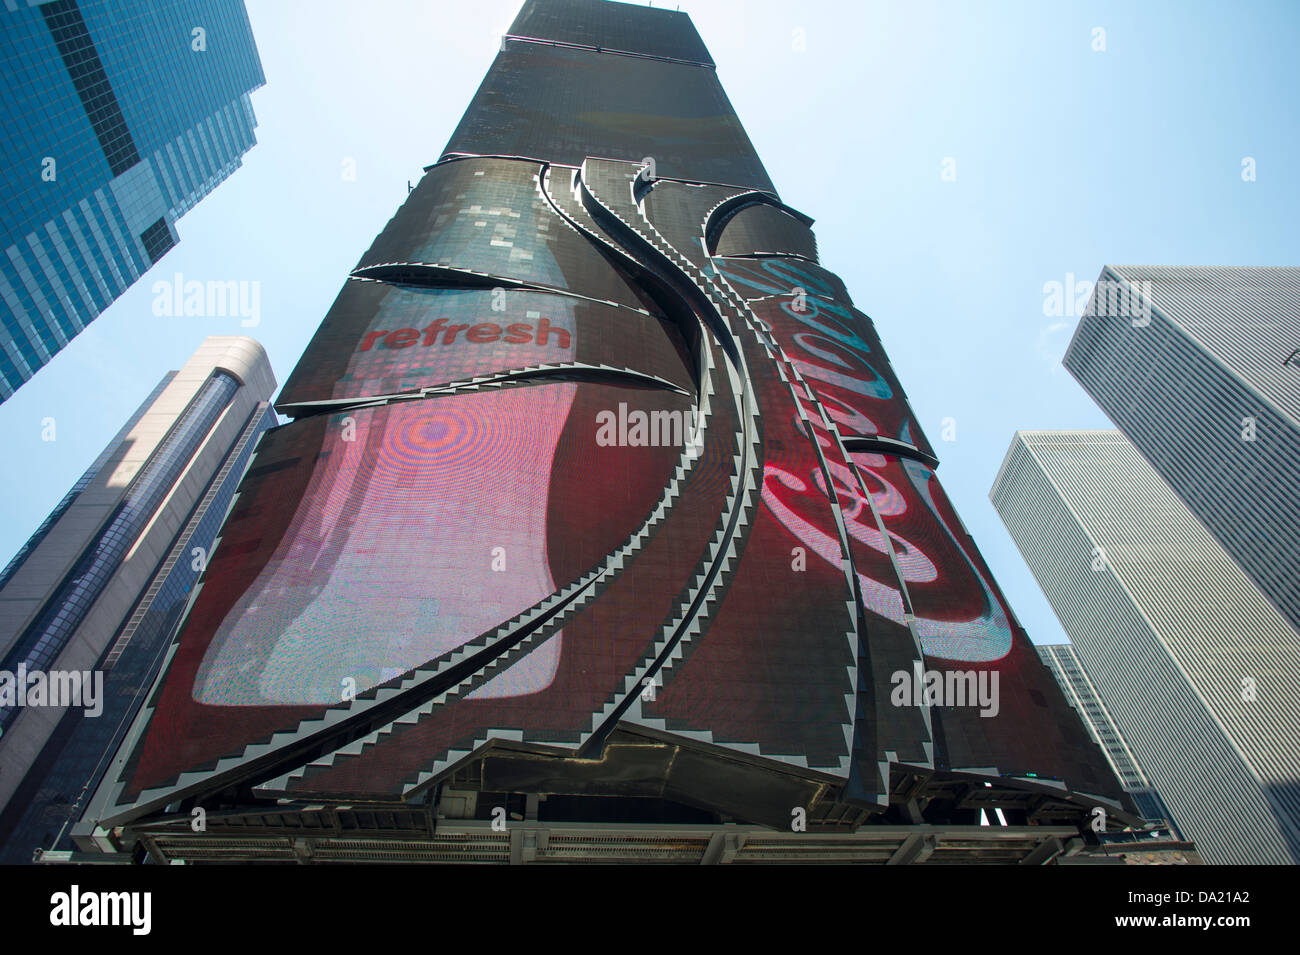 Coca-Cola billboard seen in Times Square, in New York on Friday, June 21, 2013. (© Frances M. Roberts) Stock Photo